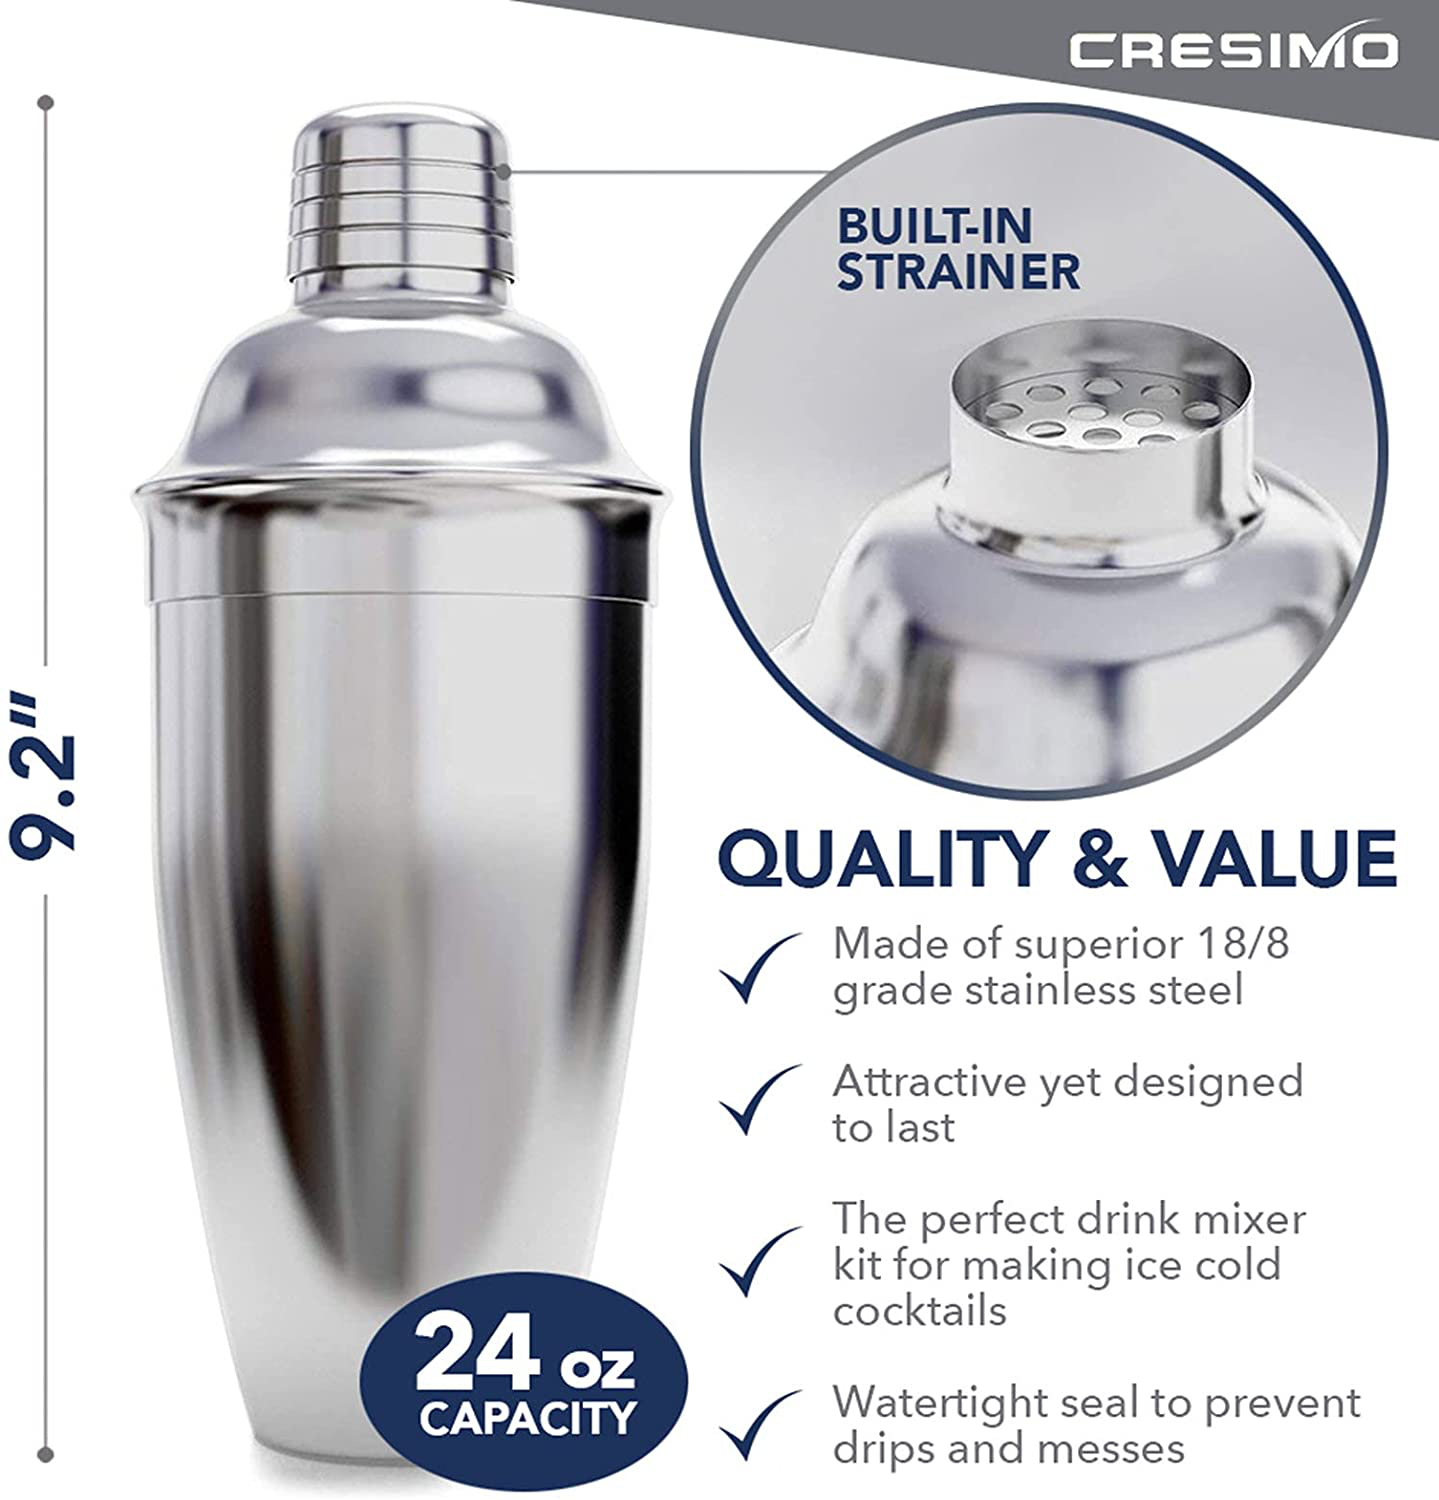 Cocktail Shaker Set by Cresimo - Stainless Steel Bartending Kit with 24 Ounce Cocktail Shaker with Built in Drink Strainer, Measuring Jigger, Mixing Spoon & Drink Recipe Guide - Professional Bar Tools